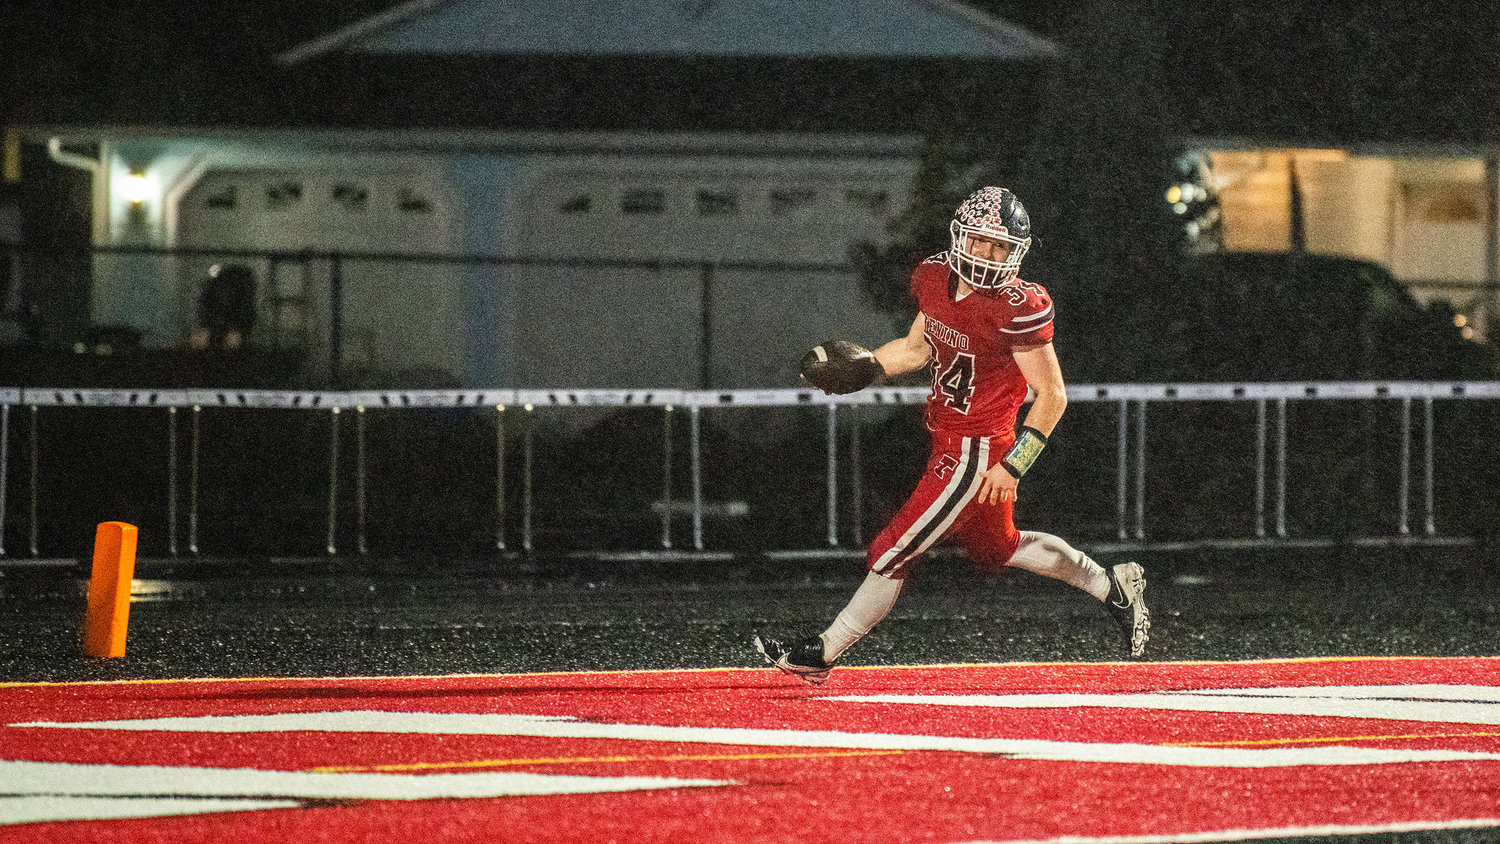 Tenino senior Randall Marti (34) runs the football into the end zone for a score during a Friday night game at Beaver Stadium.